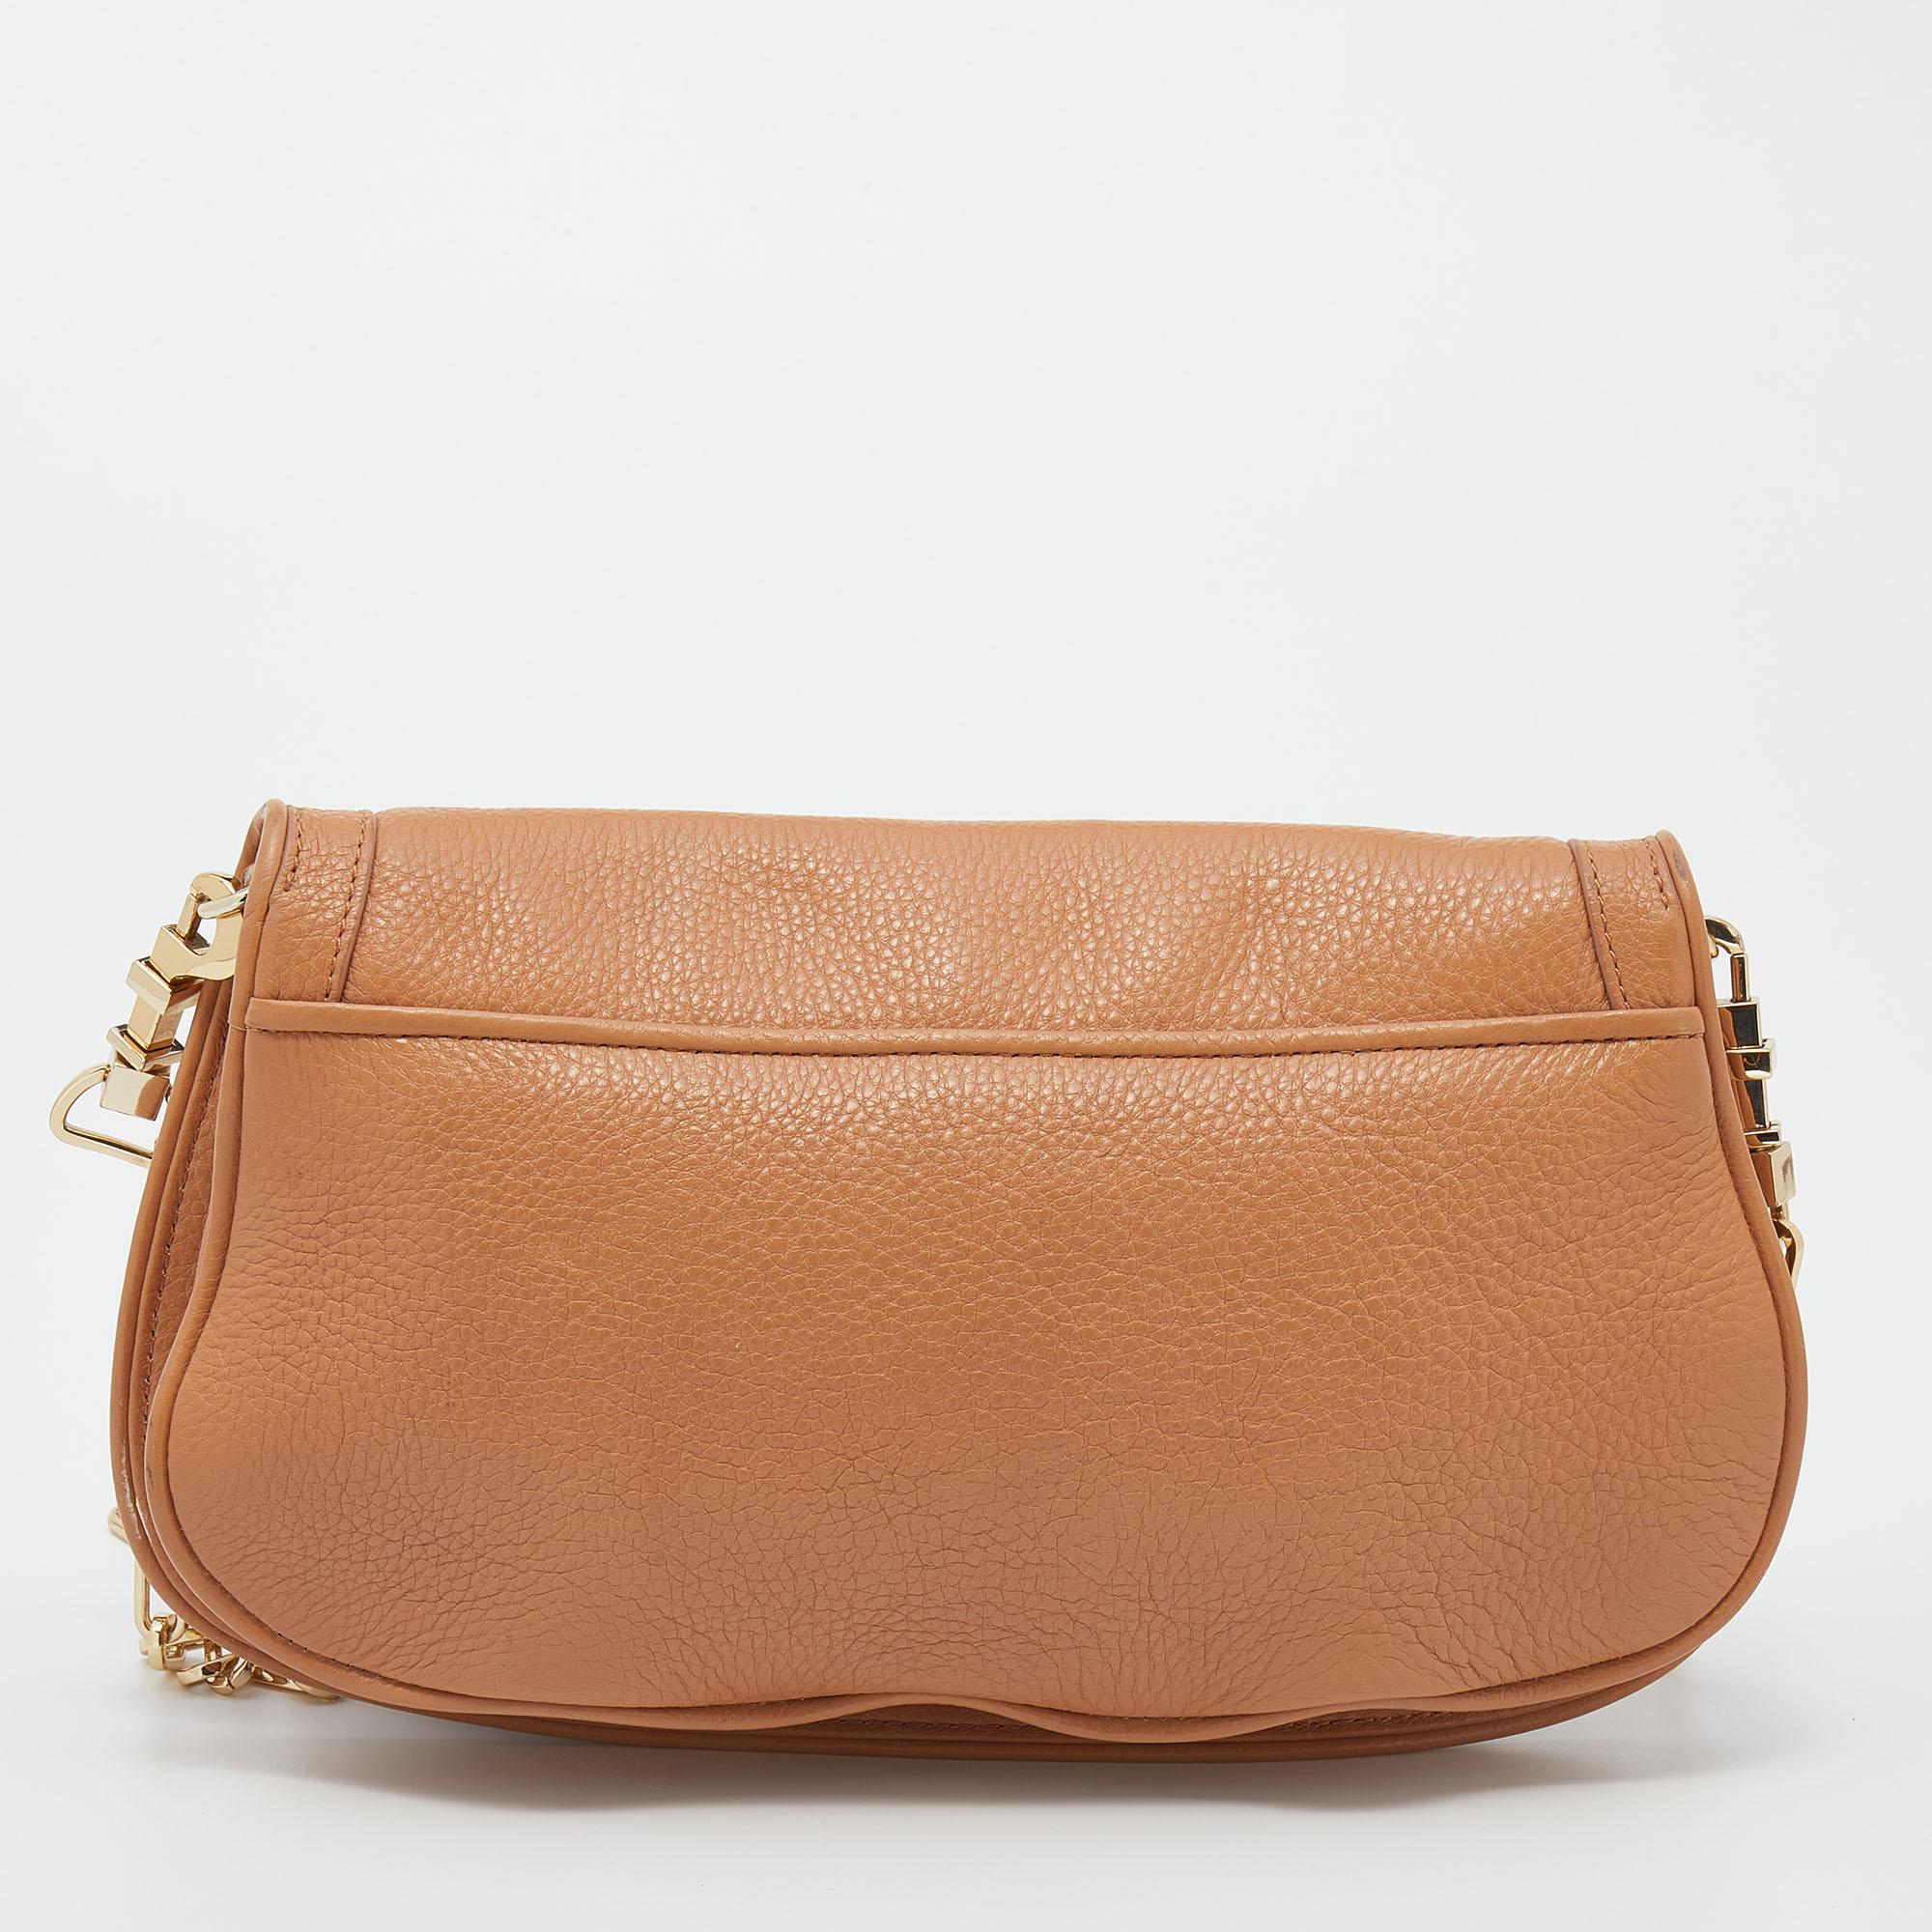 Elegant and classy, this Amanda crossbody bag from the House of Tory Burch is just what you need to add to your collection. It is made from tan leather on the exterior and flaunts a 60 cm shoulder strap, gold-tone hardware, and a roomy fabric-lined